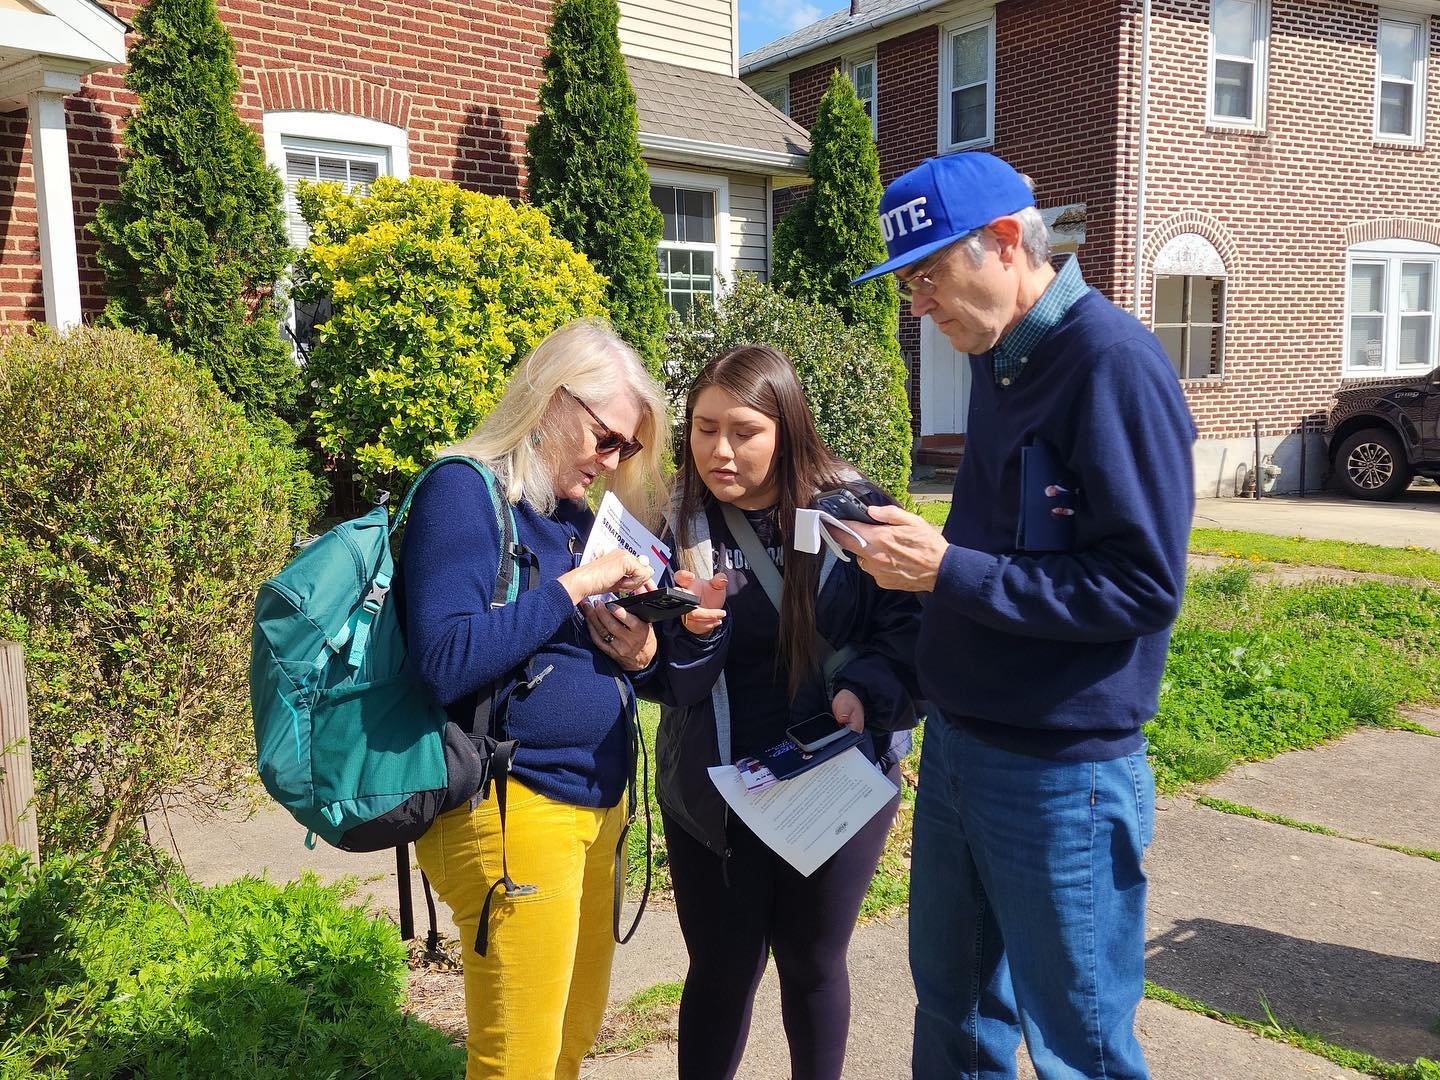 Team PA touched down this weekend and have been canvassing in Philly! ✈️

Crucial races are happening from the national to local level. Needless to say, we had to make sure to get out here for the Primary Election. 🗳👏

We&rsquo;ll be in Philly till